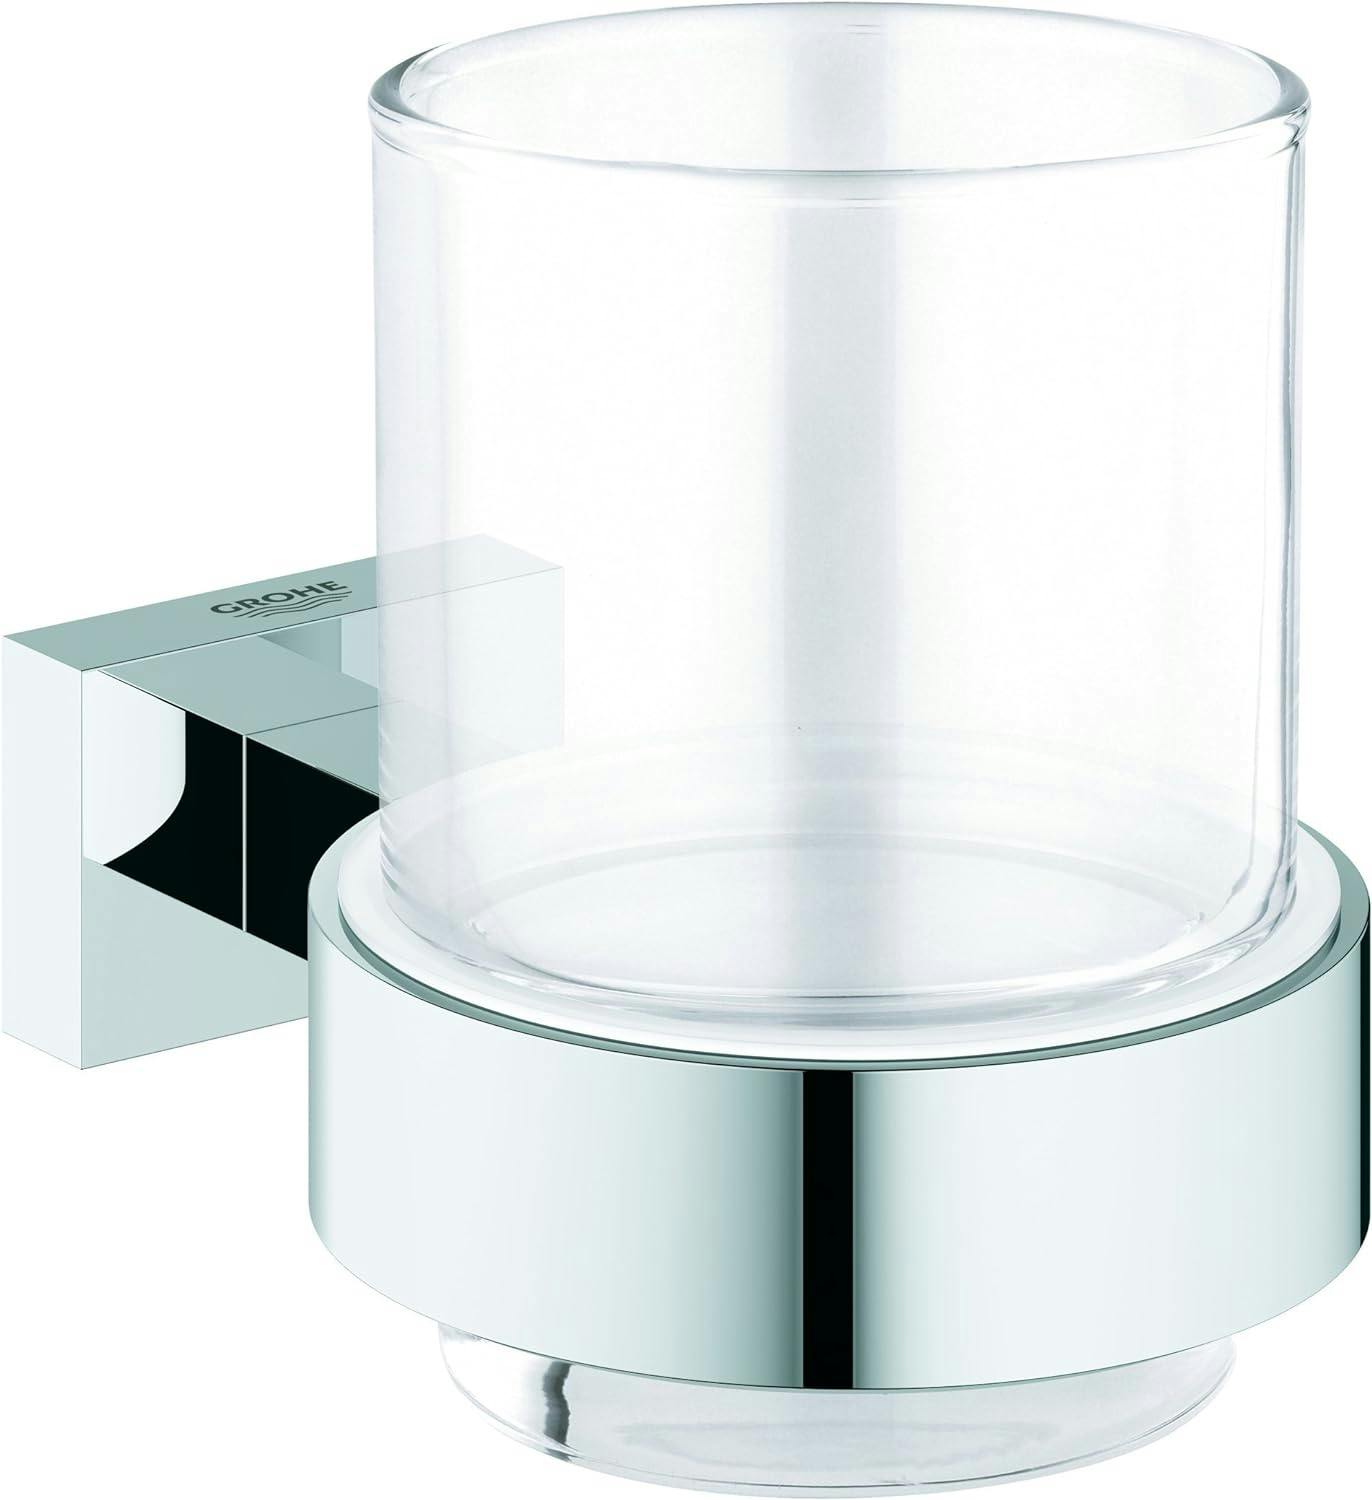 Modern Chrome Wall-Mounted Toothbrush Holder with Glass